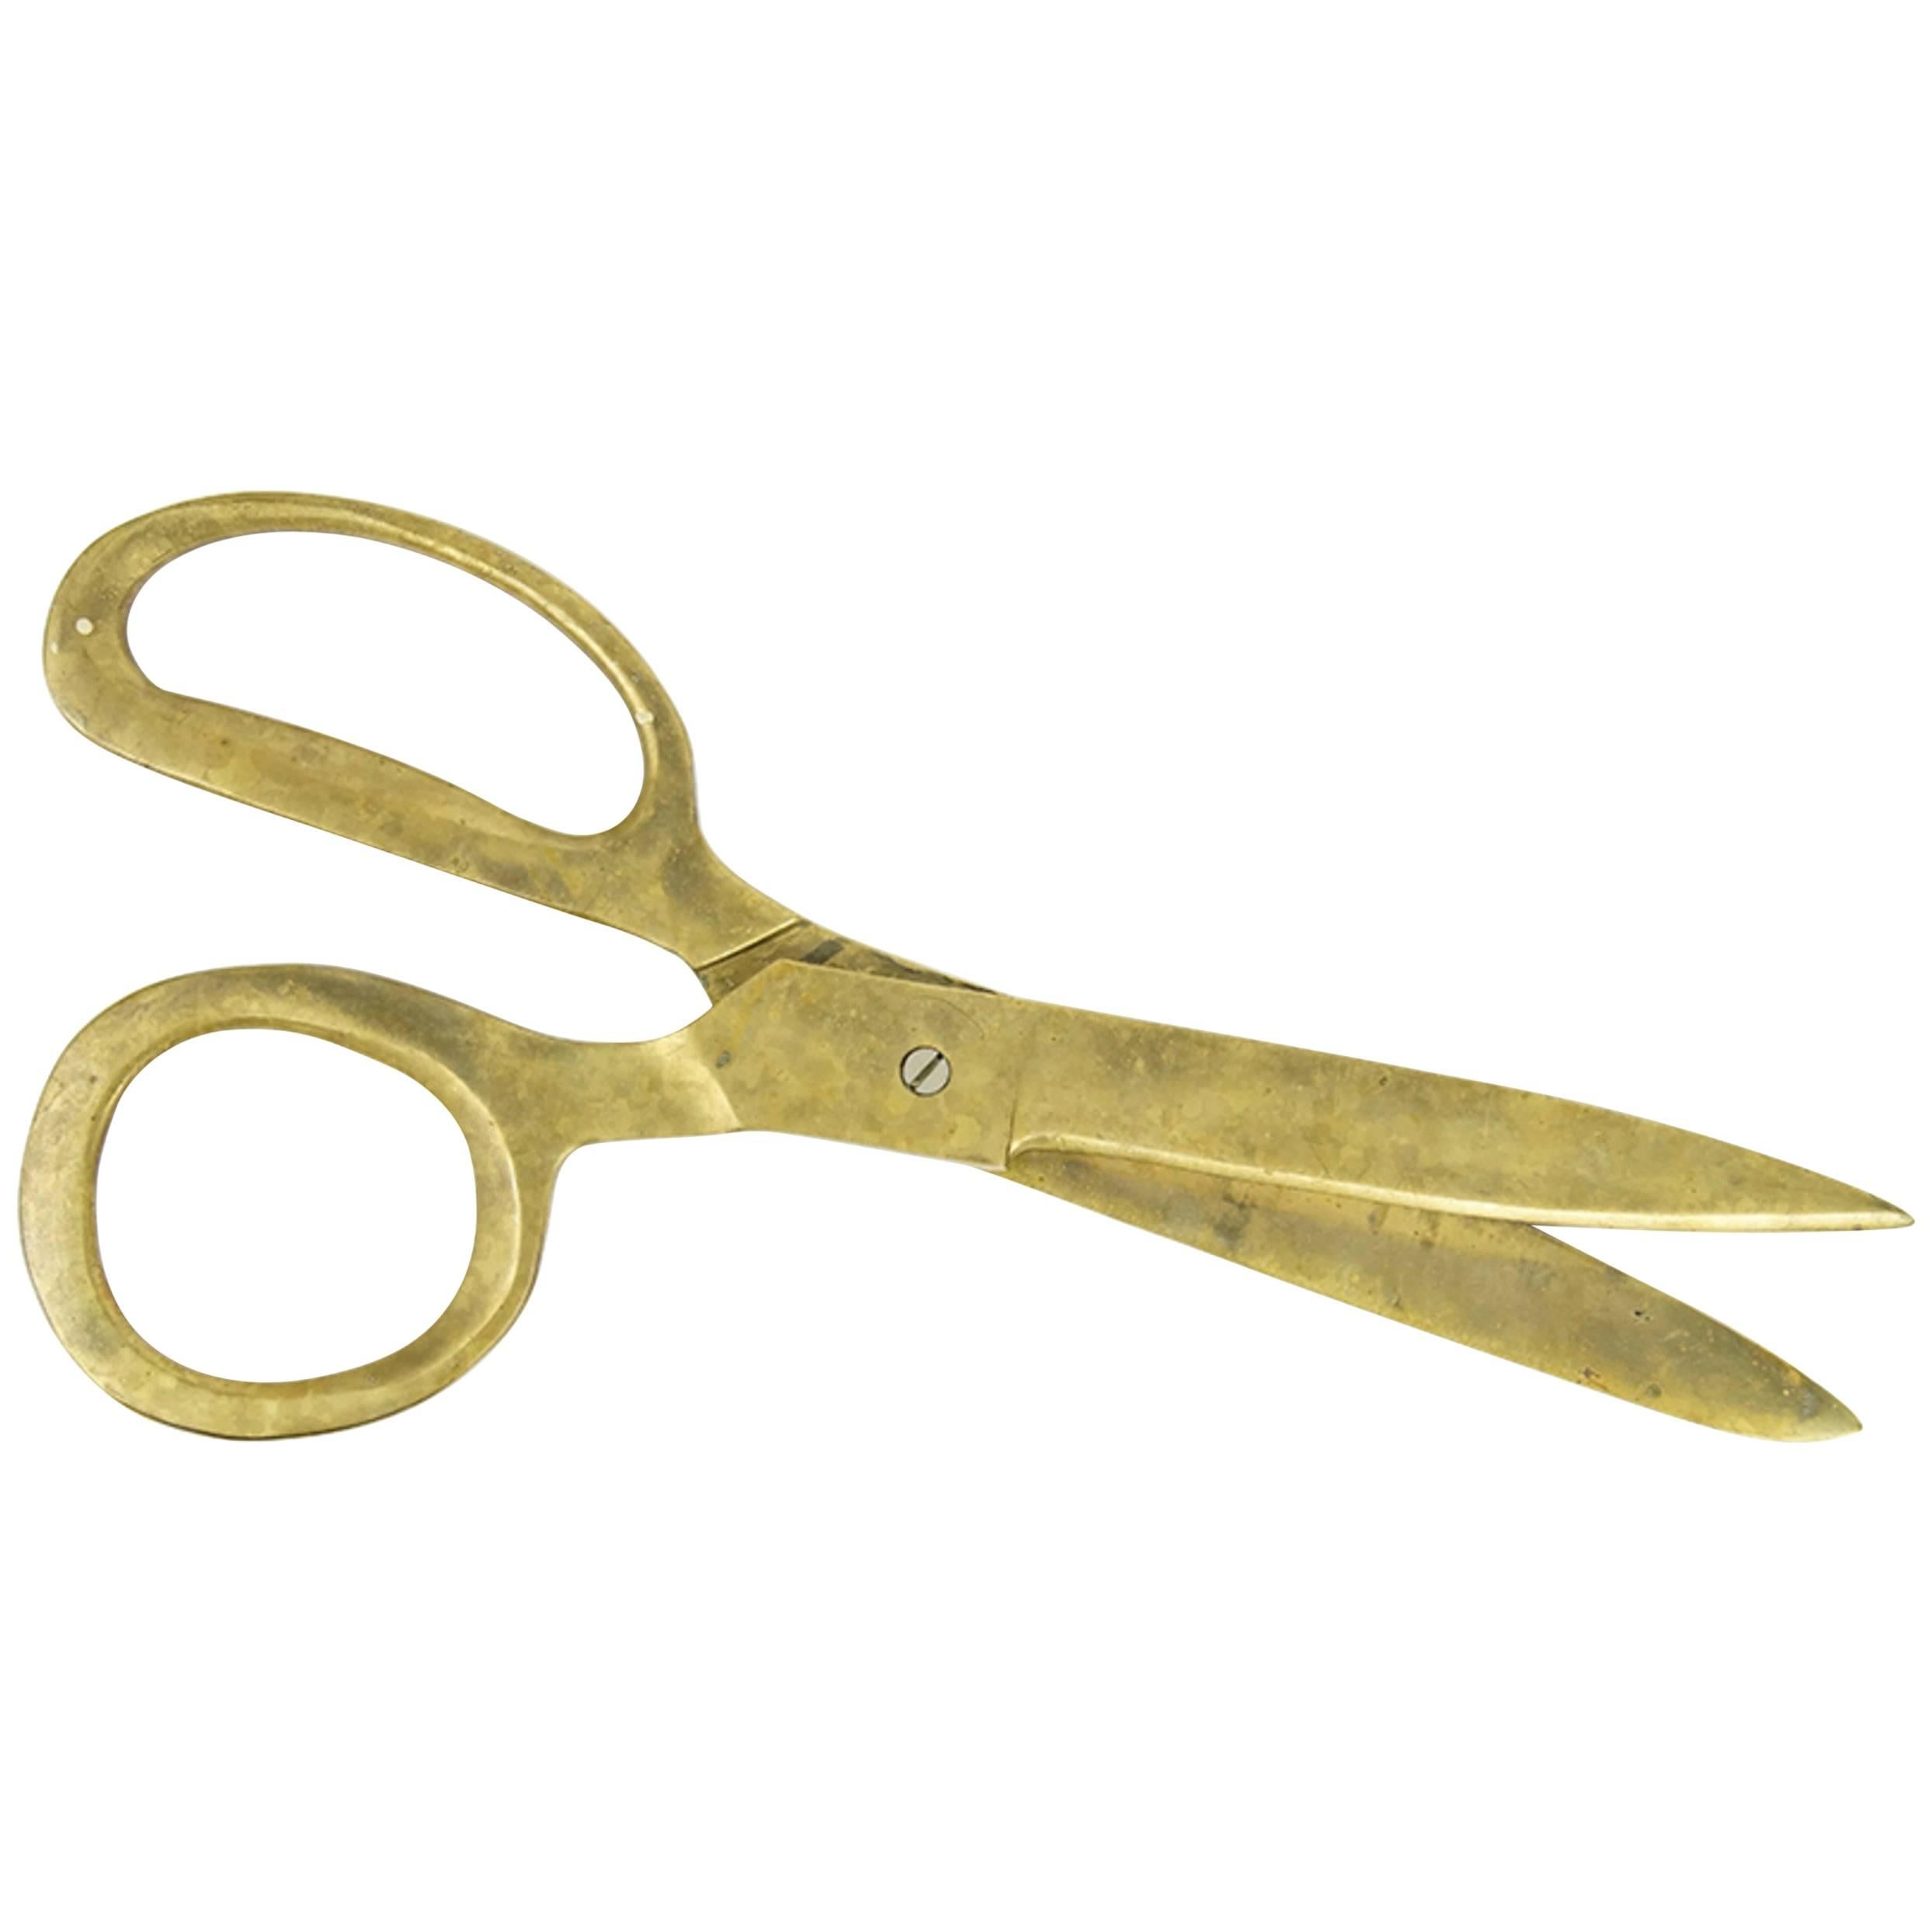 Monumental Pair of Brass Scissors in the Style of Carl AuböCk, Unsigned, Hinged For Sale